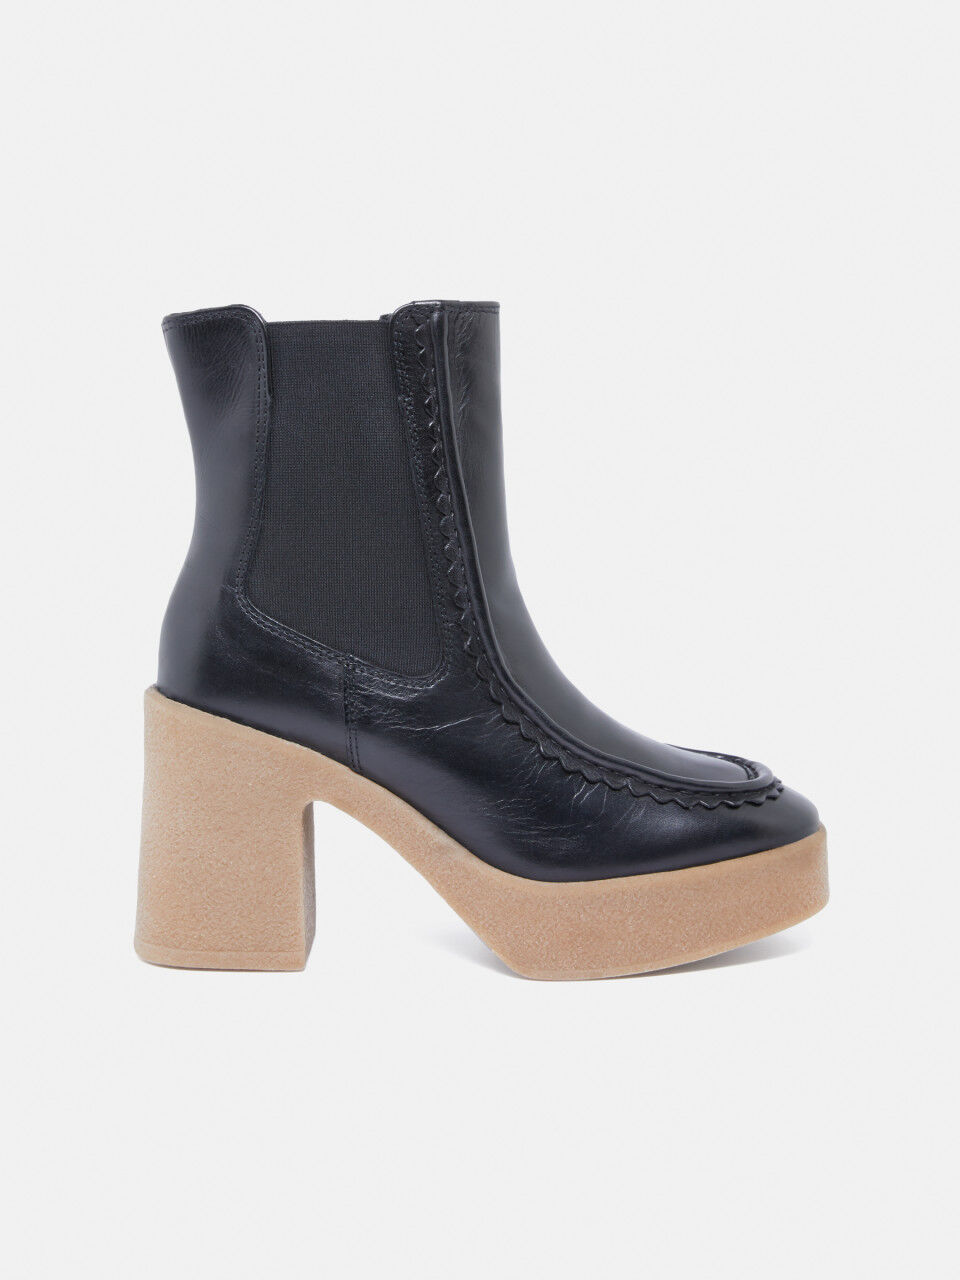 100% leather platform ankle boots